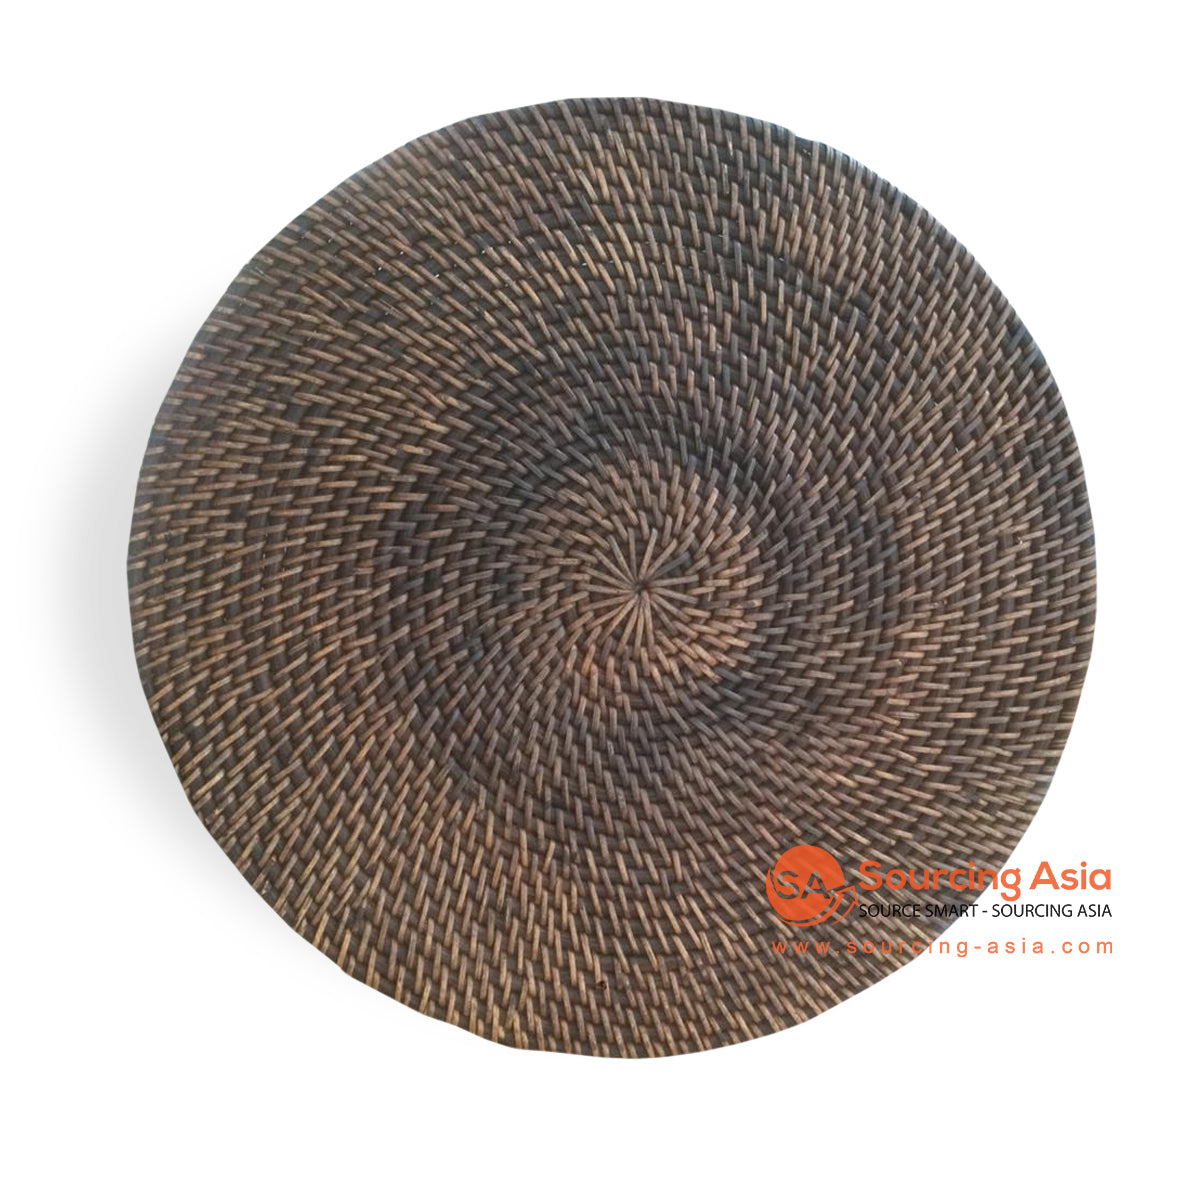 MTI006-3 BROWN WOVEN RATTAN LOMBOK ROUND PLACEMAT